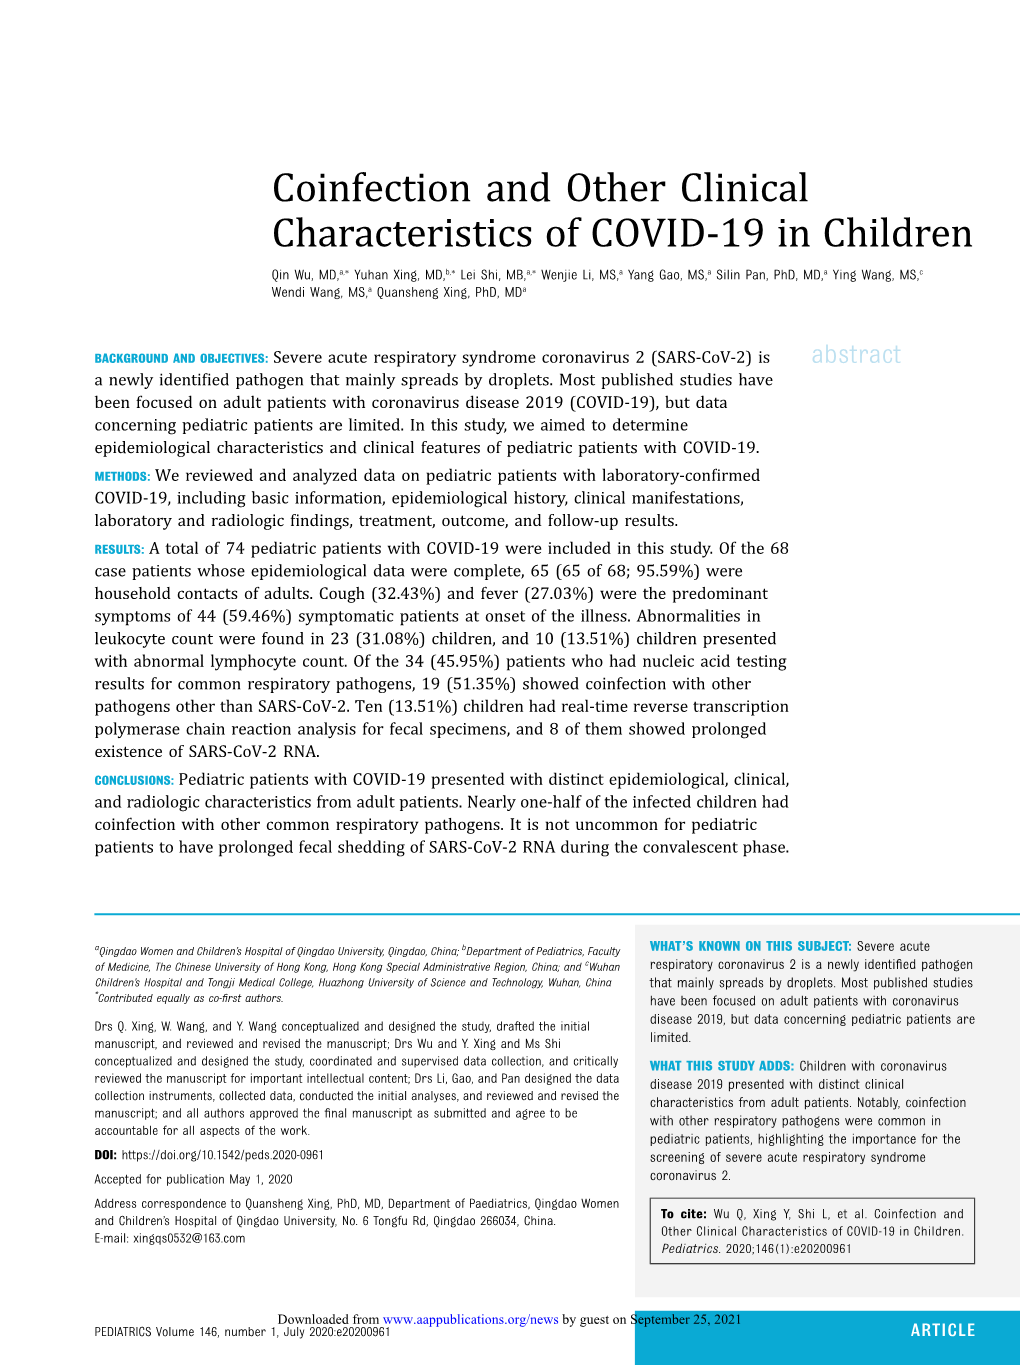 Coinfection and Other Clinical Characteristics of COVID-19 In